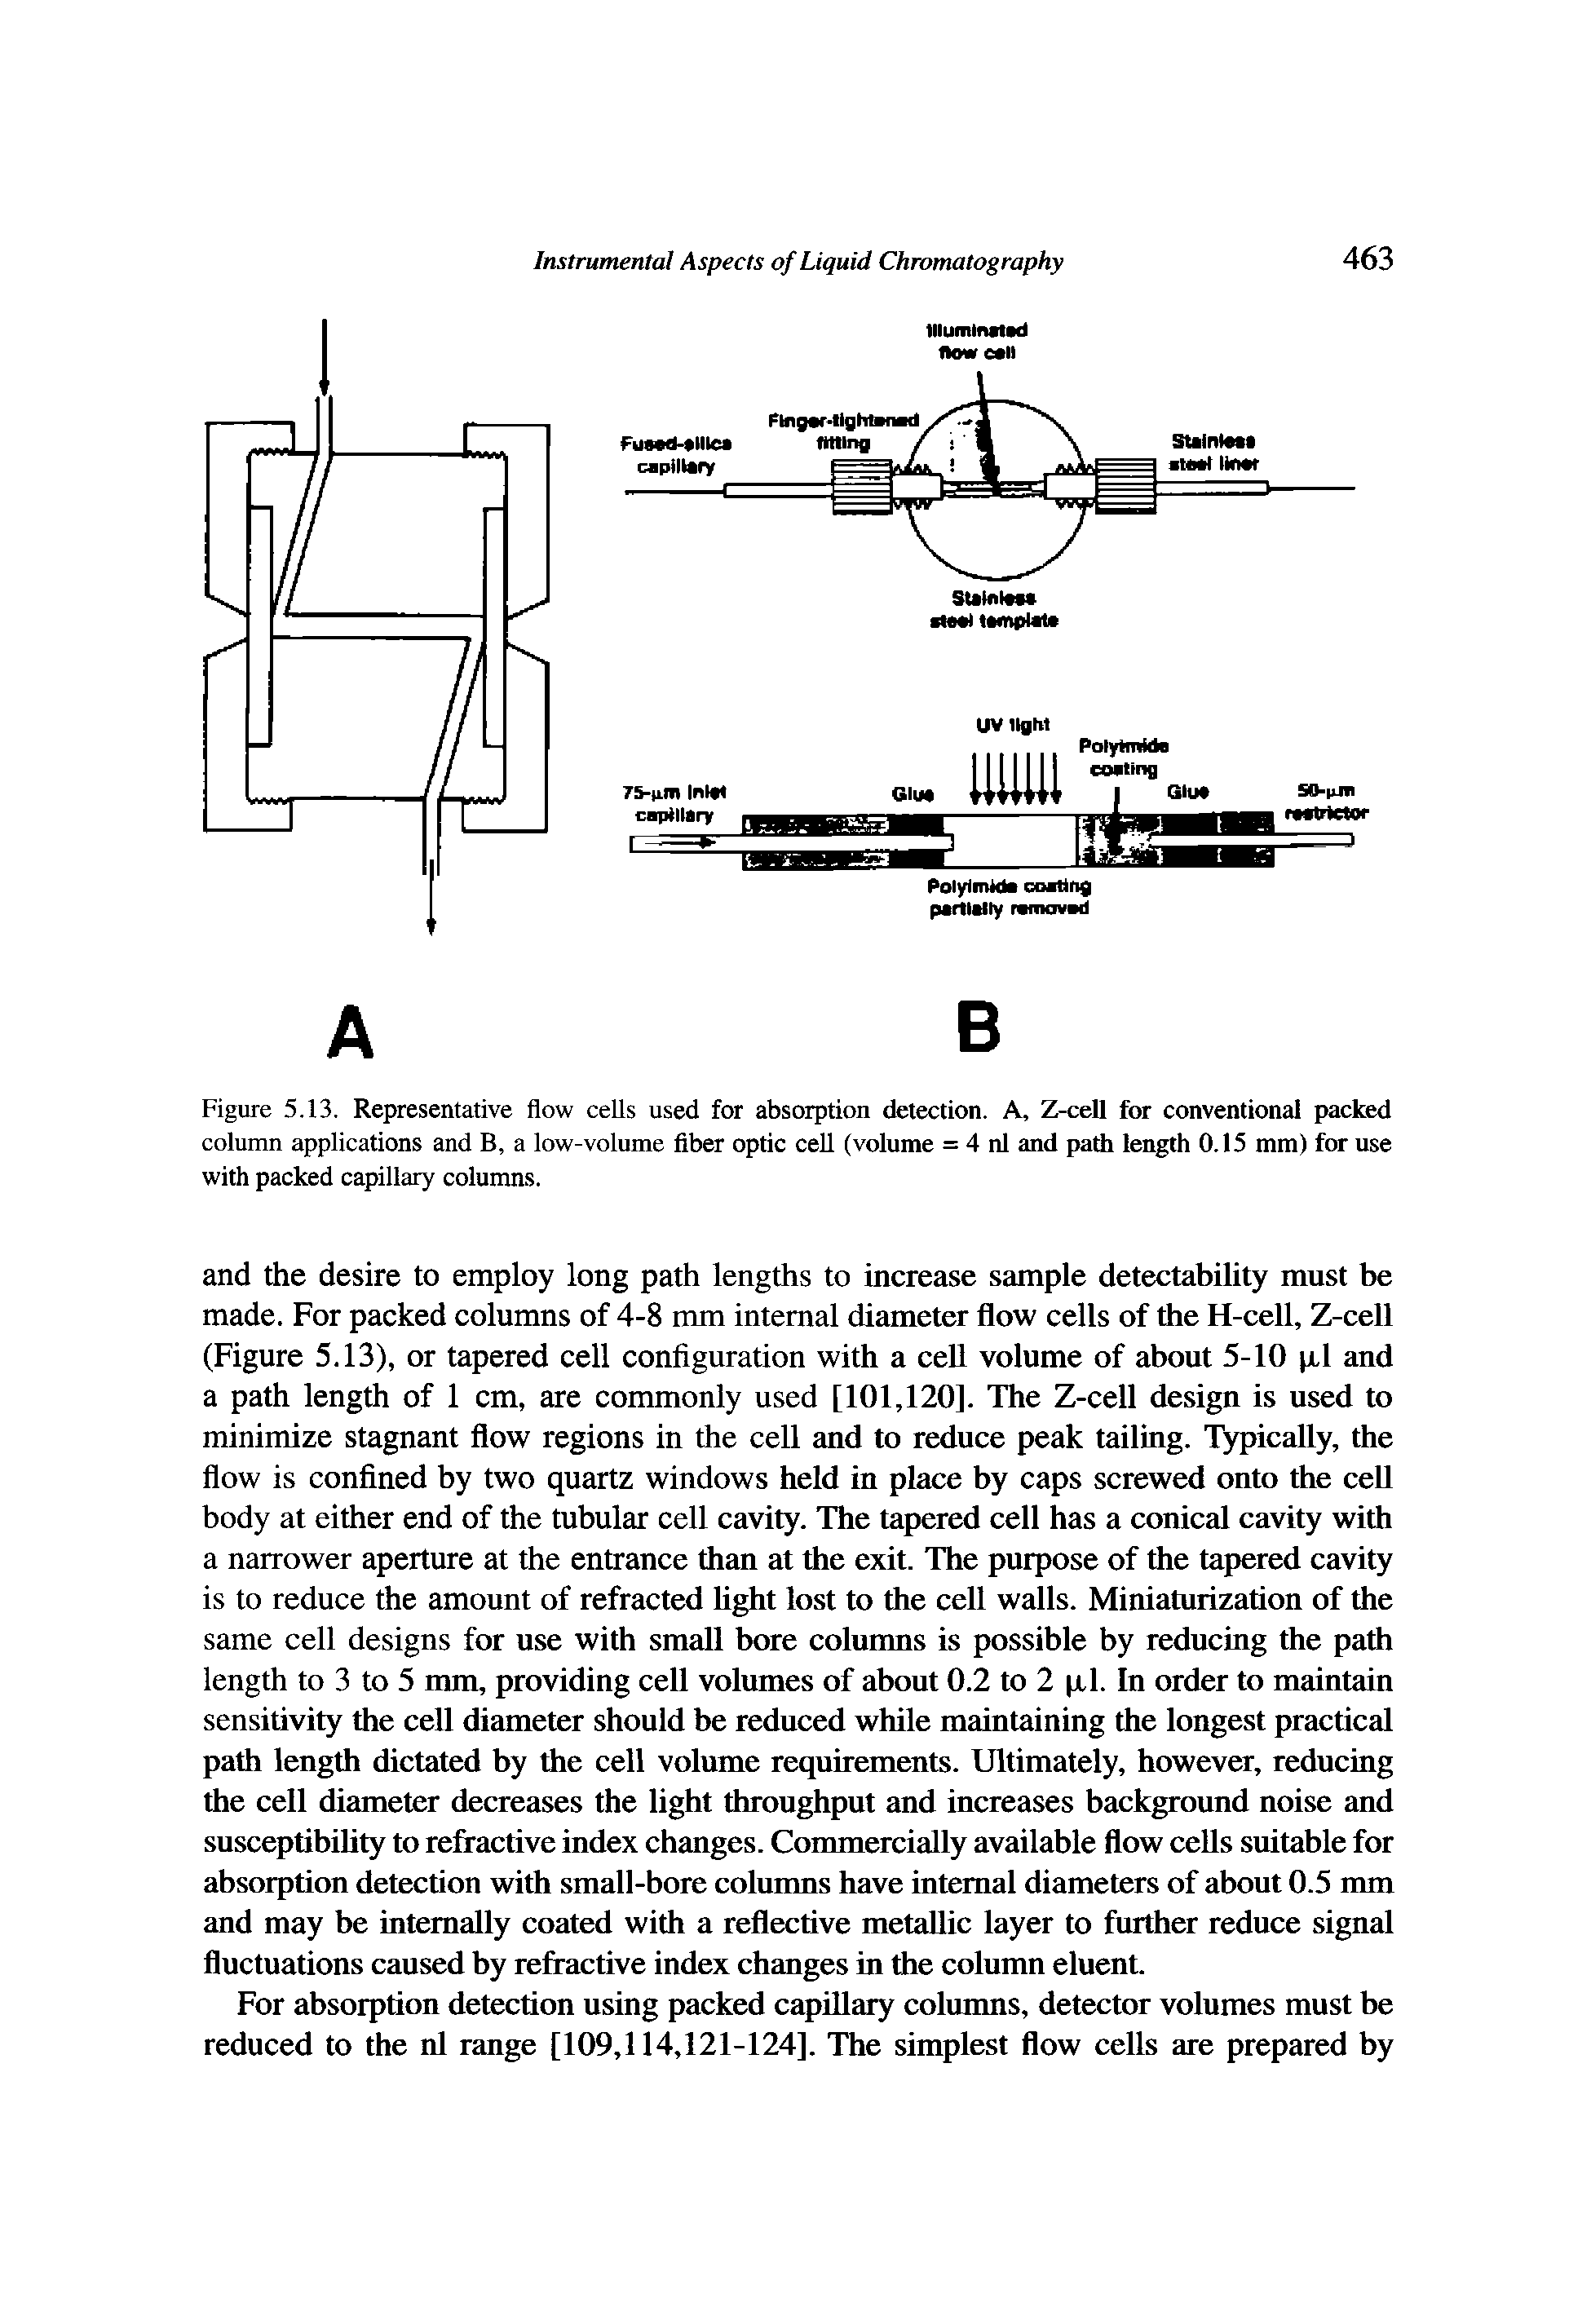 Figure 5.13, Representative flow ceUs used for absorption detection. A, Z-cell for conventional packed column applications and B, a low-volume fiber optic ceU (volume = 4 nl and path length 0.15 mm) for use with packed capillary columns.